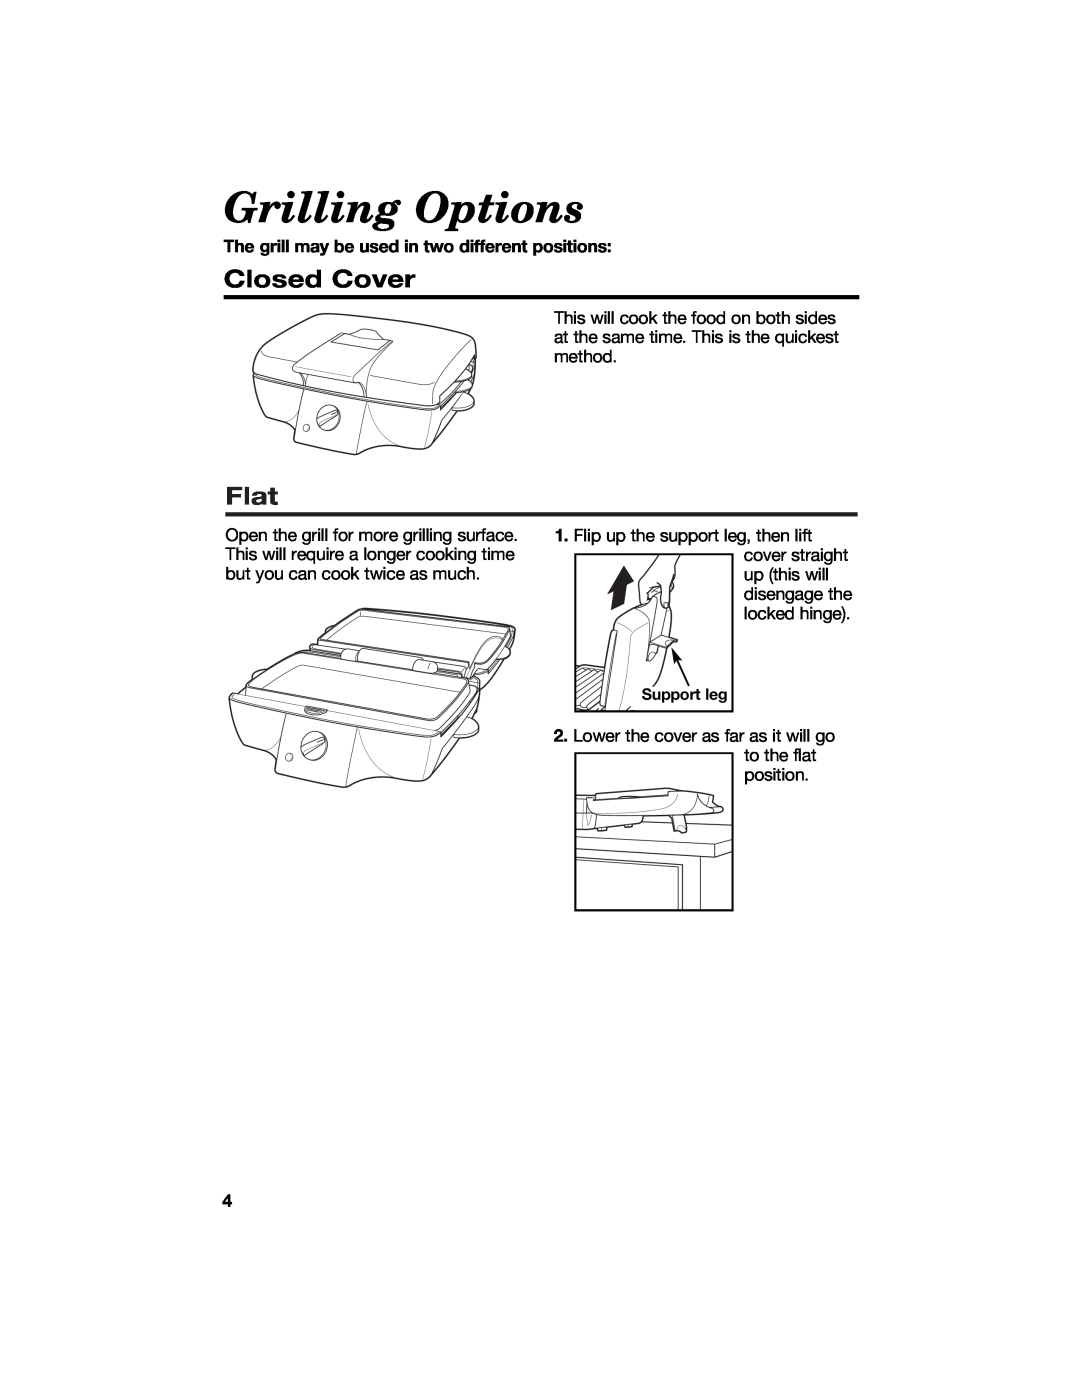 Hamilton Beach 840125300 manual Grilling Options, Closed Cover, Flat, The grill may be used in two different positions 